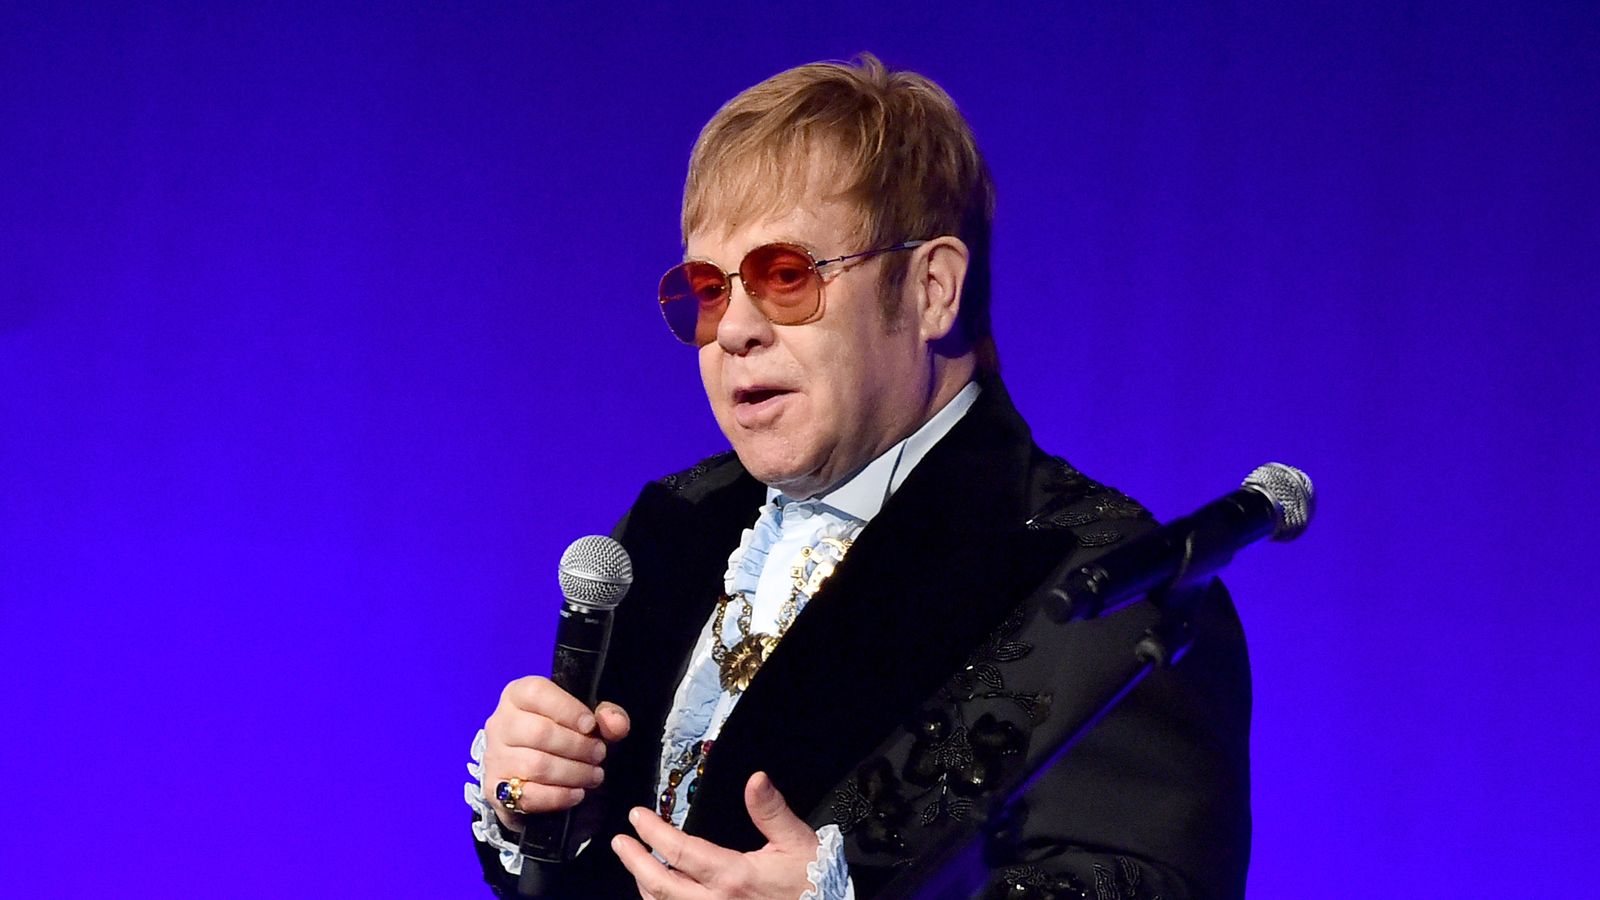 Elton John 'deeply sorry' for cancelled Florida shows due to ear infection | Ents ...